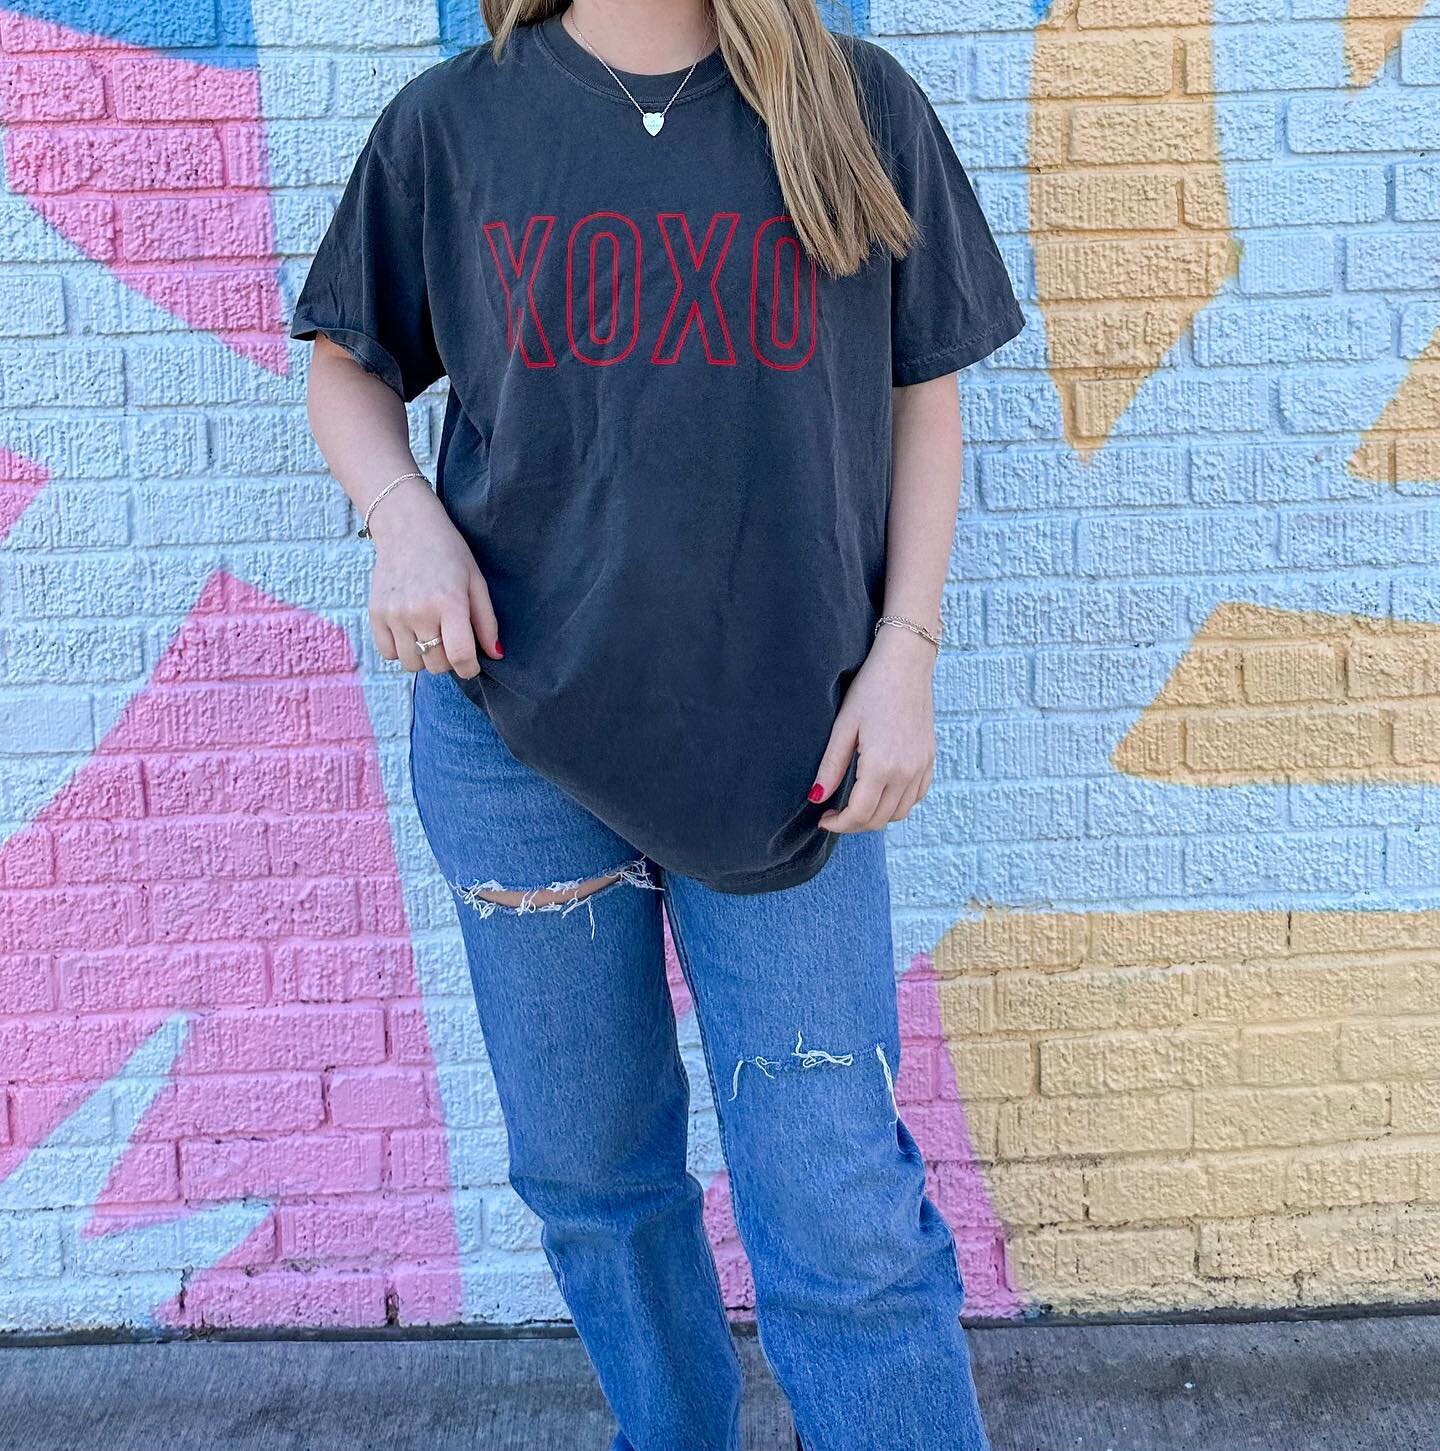 XOXO top🪩🍒

-available in gilden, comfort colors(pictured),&amp; bella canvas

-long sleeve, short sleeve, or crewneck 

-any color! 

short sleeve T-shirt-$20
long sleeve shirt-$25
crewneck-$35

#smallbusiness #shopsmall #shoplocal #oklahoma #comf